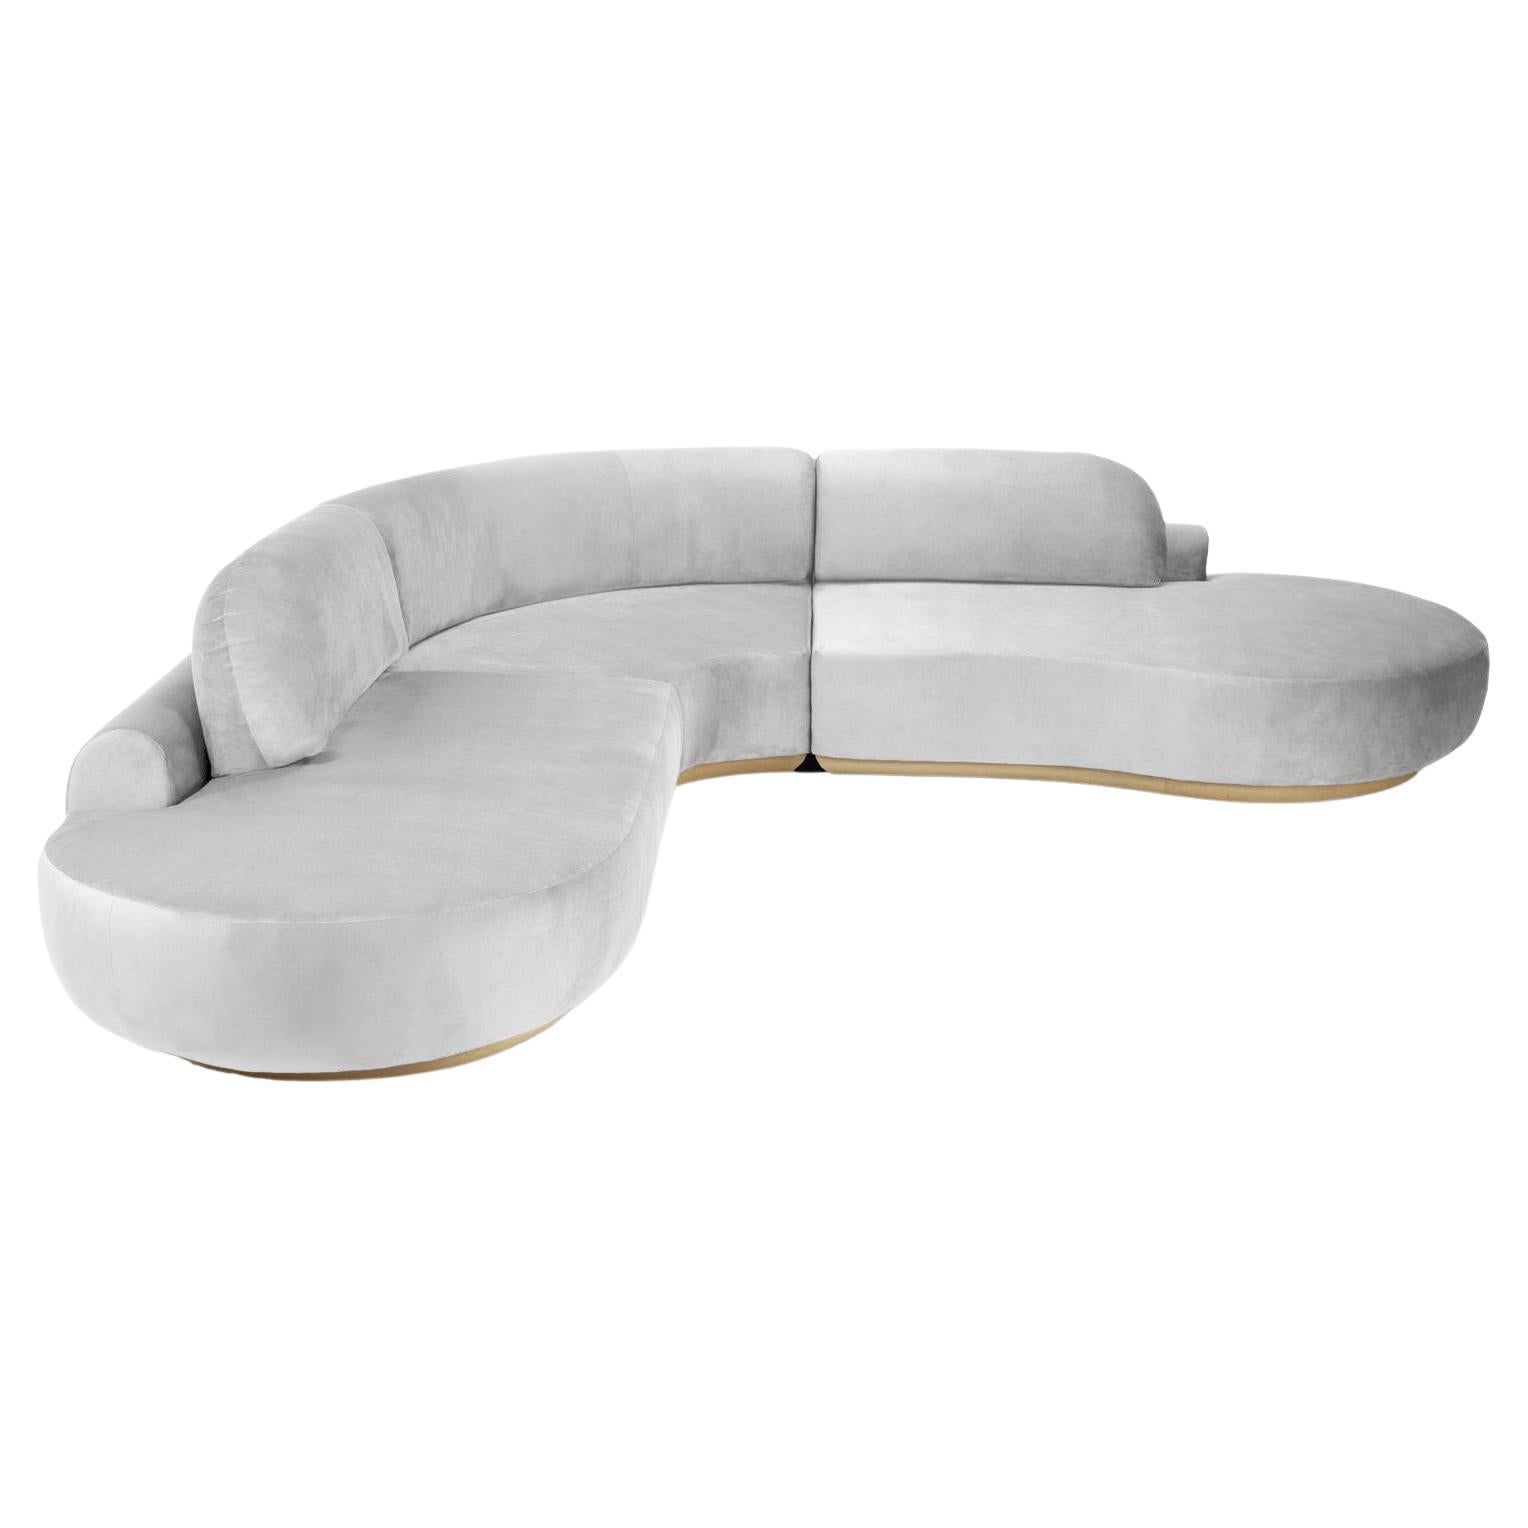 Naked Curved Sectional Sofa, 3 Piece with Natural Oak and Aluminium